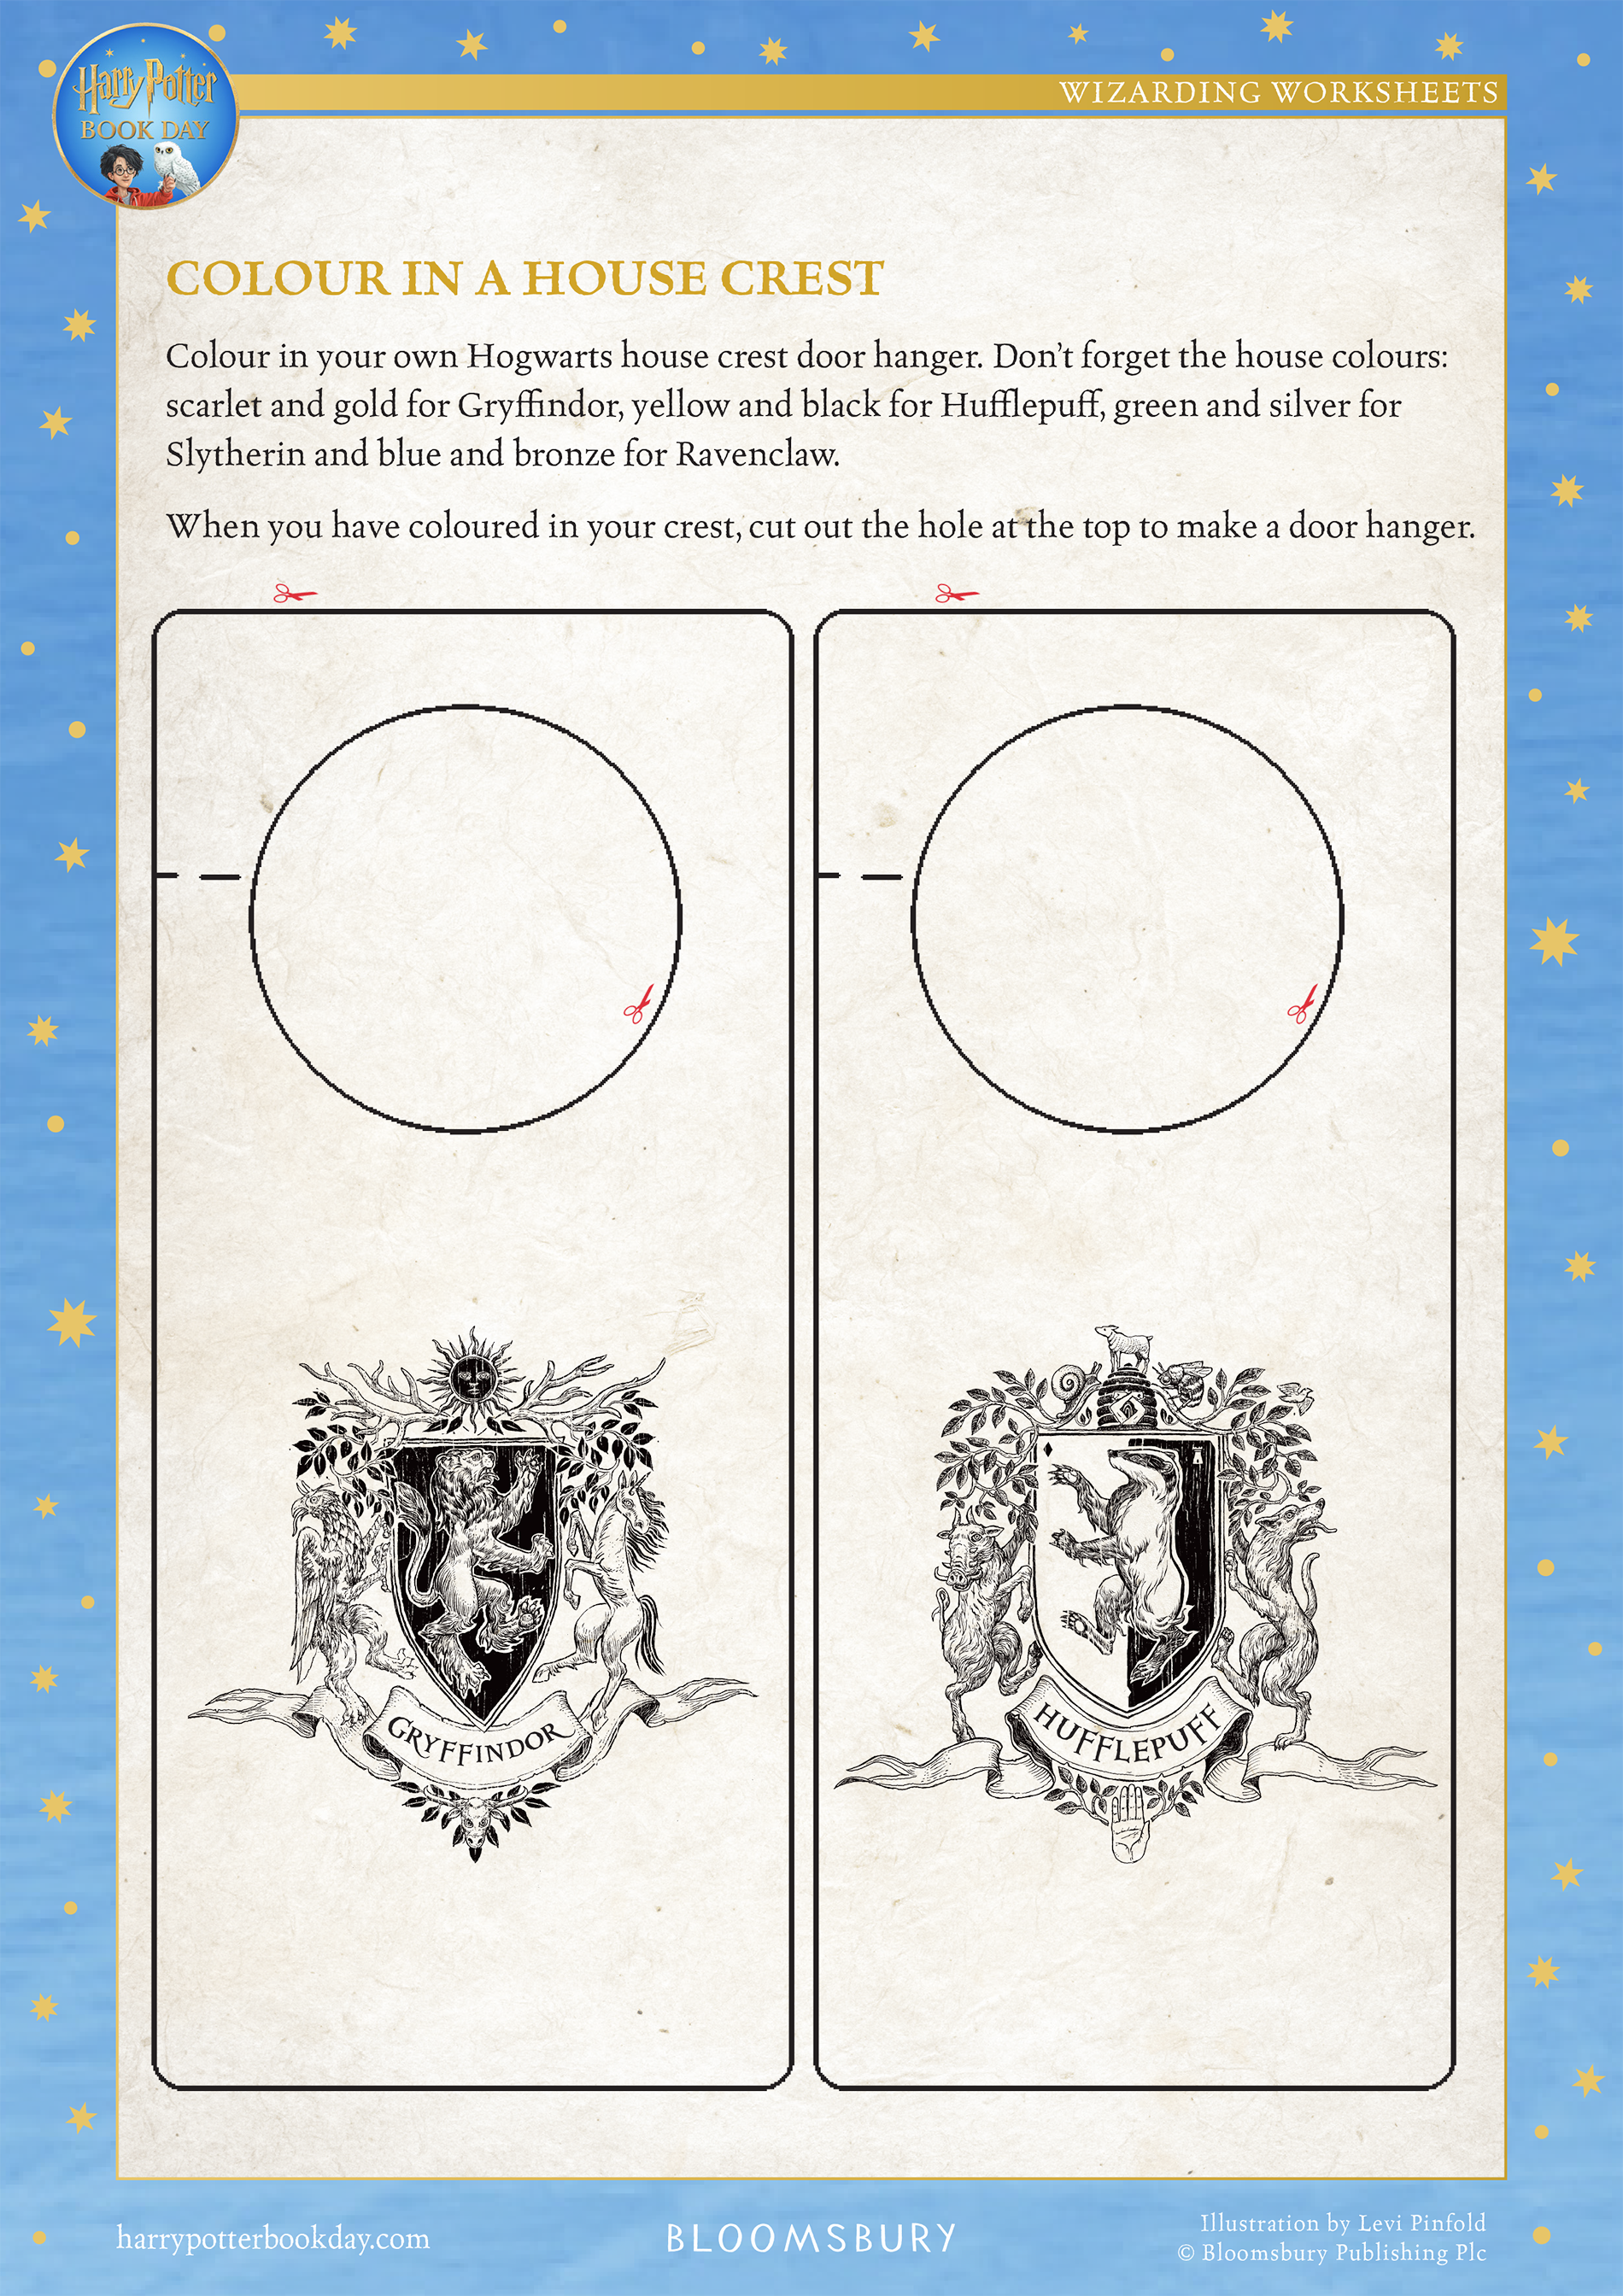 Try these printable Harry Potter activity sheets